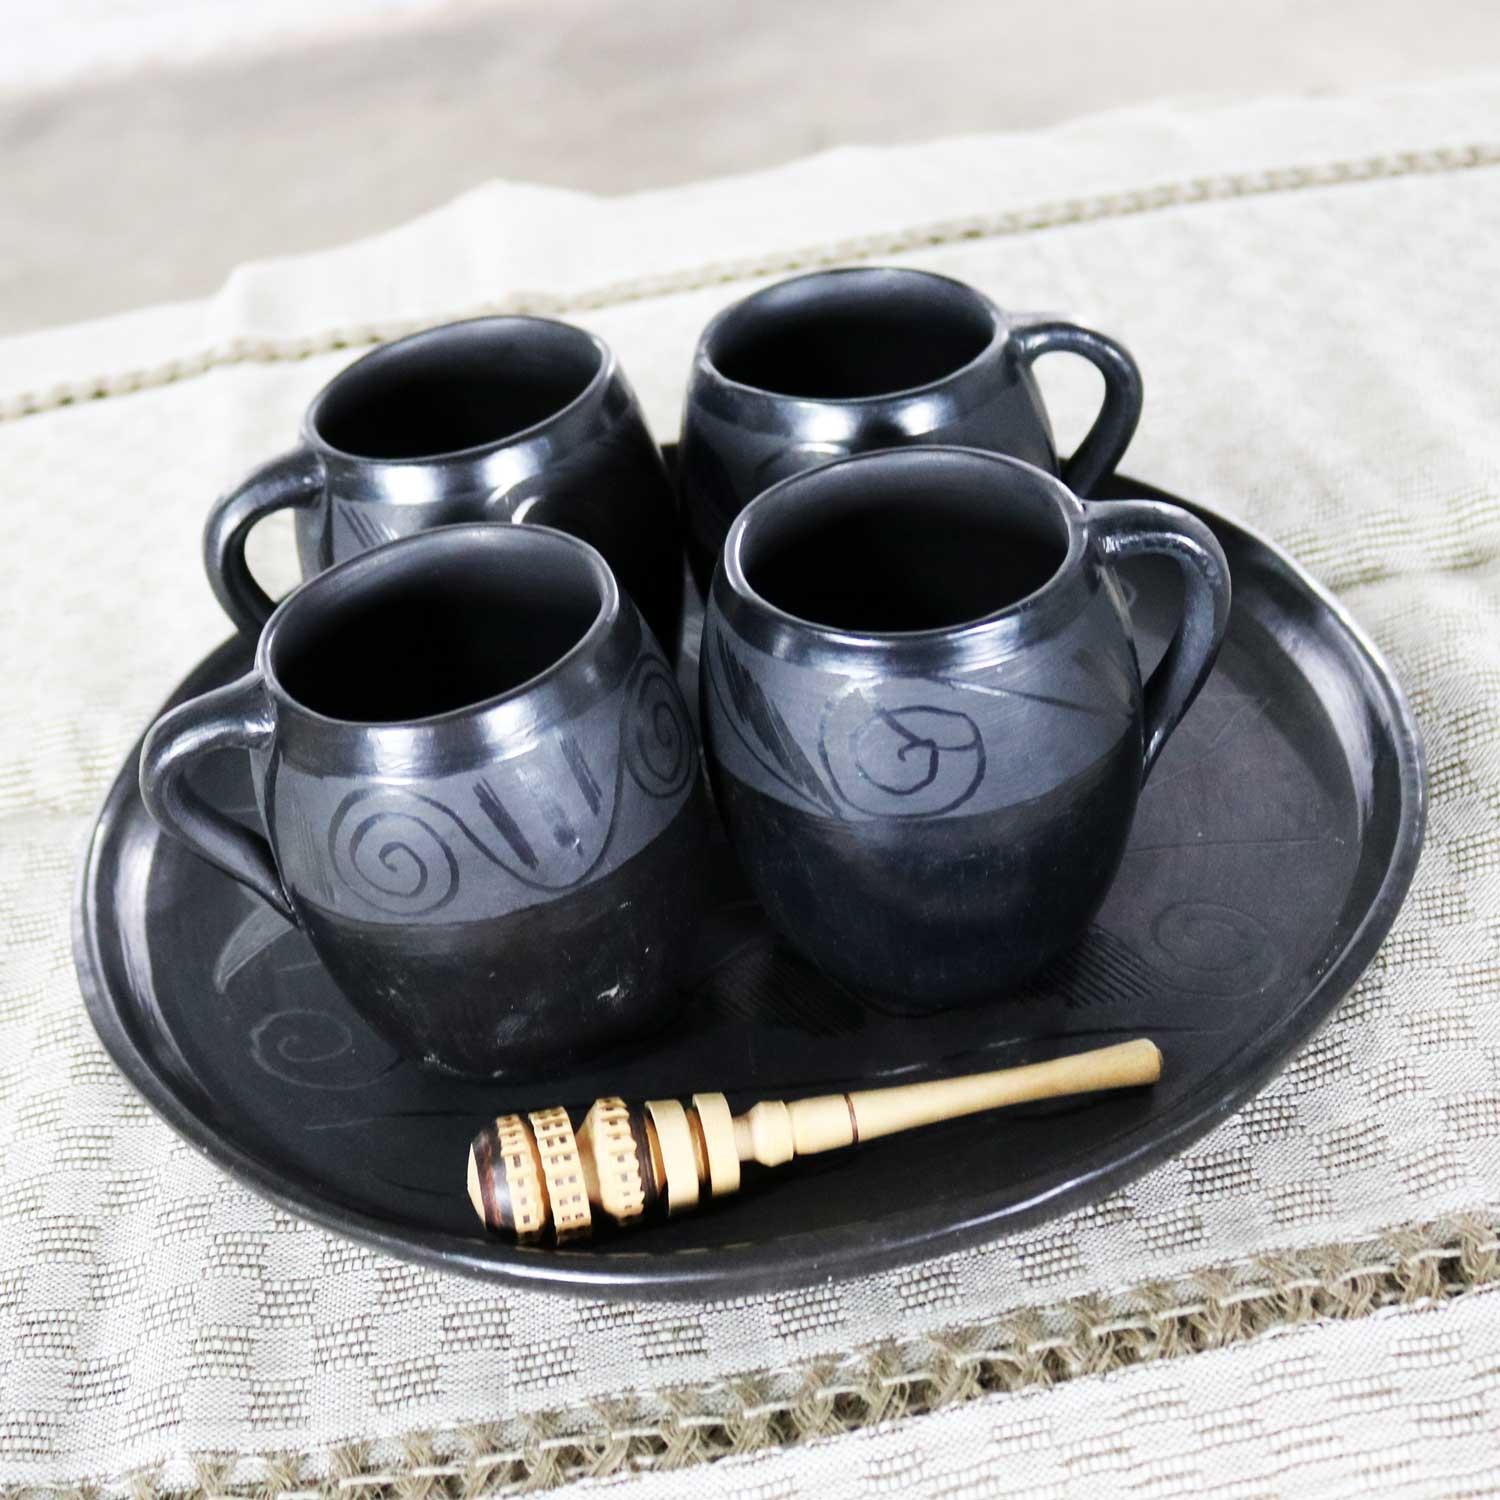 Handsome black clay or barro negro pottery hot chocolate set most likely from Oaxaca, Mexico consisting of 4 mugs, tray with Fish design, and wooden cocoa whisk. All pieces are in wonderful vintage condition with no outstanding flaws that we have